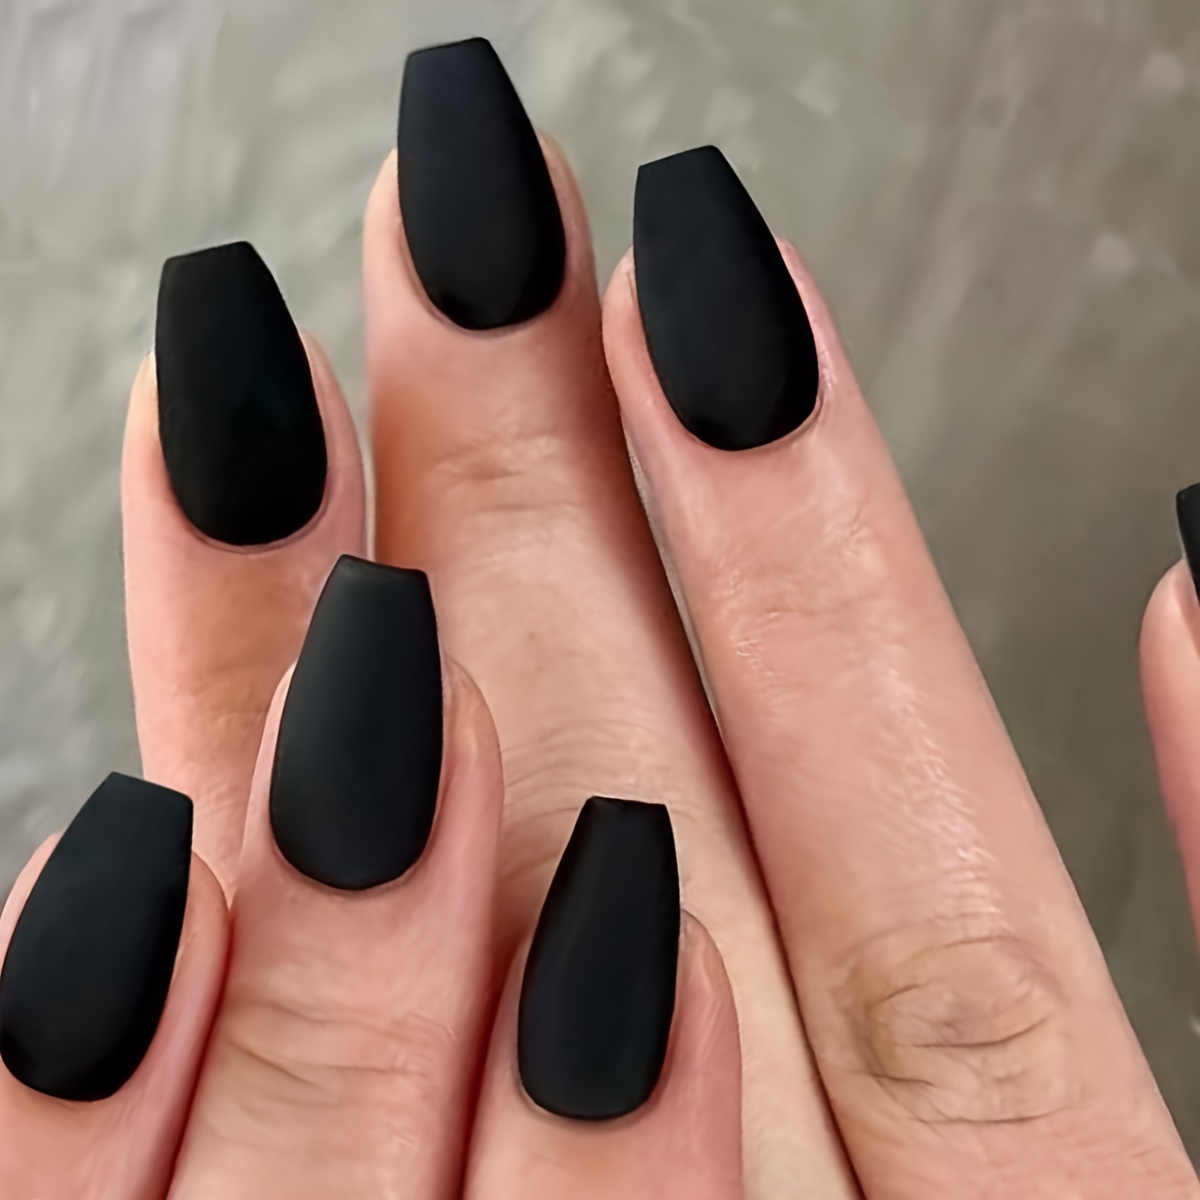 

24pcs/set Matte Black Ballerina False Nails Frosted Medium Press On Fake Nails Minimalist Style Solid Color Acrylic Nail Art Set For Women Girls, 1pc Nail File And 1sheet Adhesive Tabs Included